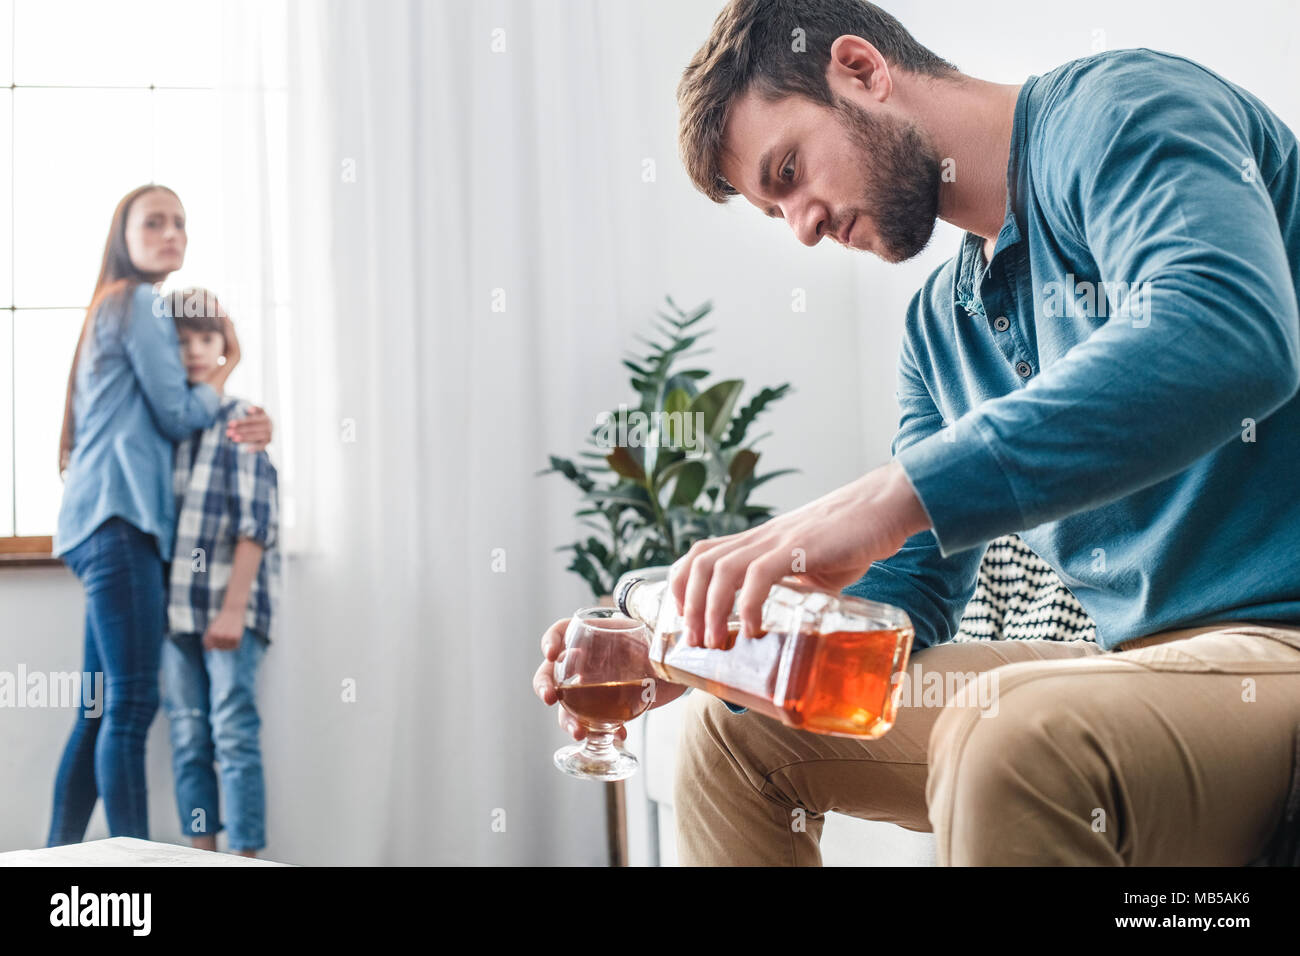 Mother father and son social problems alcoholism man pouring whiskey into glass while wife with kid standing near window scared Stock Photo